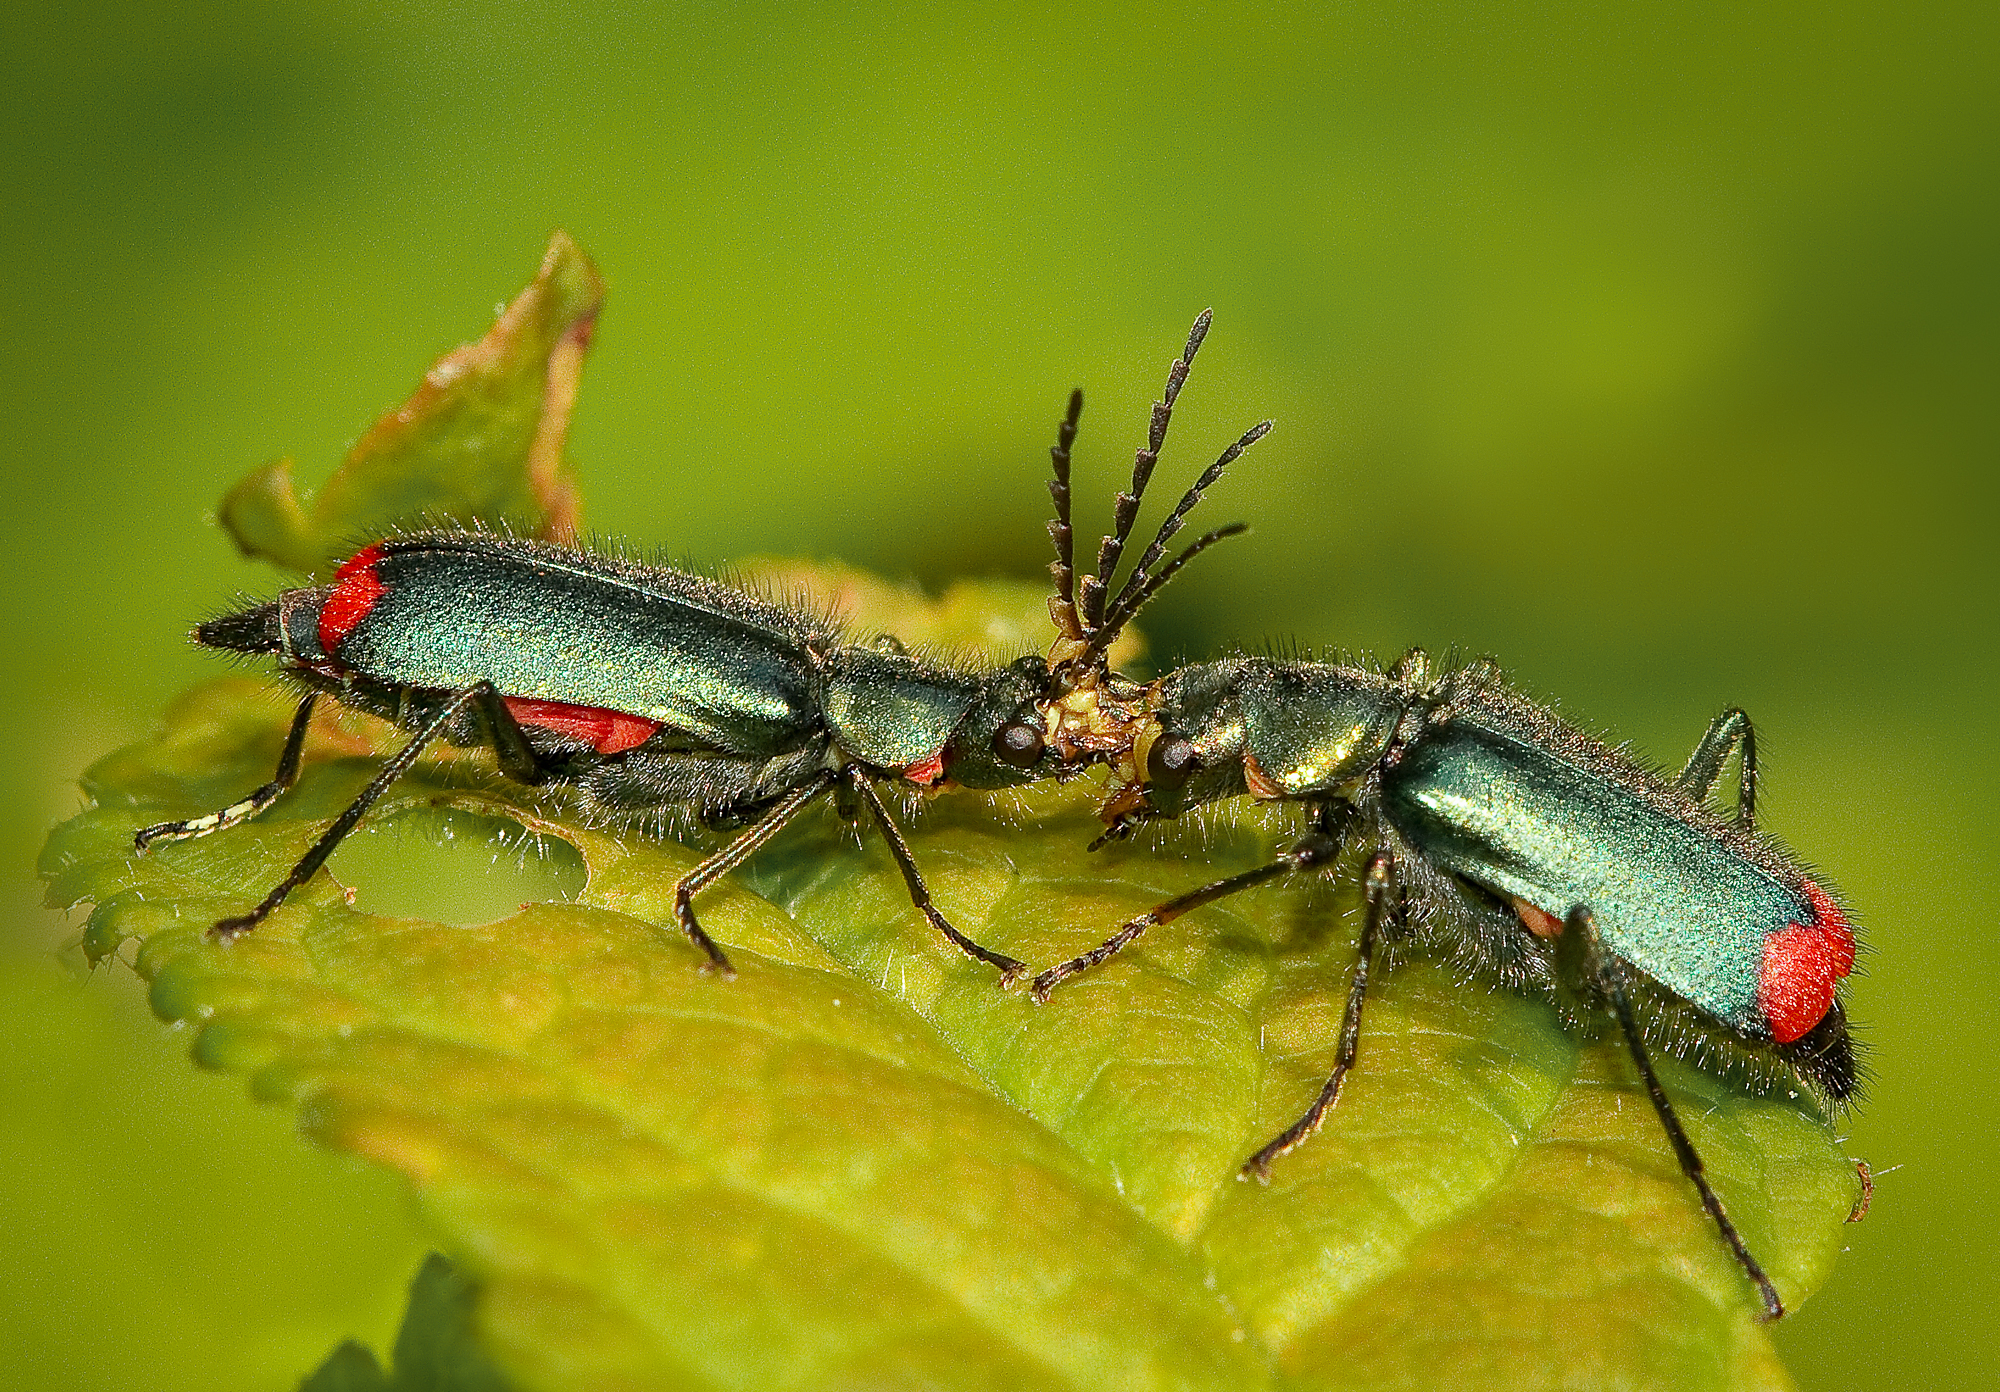 Two Red Tipped Flower Beetles, Malachius bipustulatus, on a green leaf